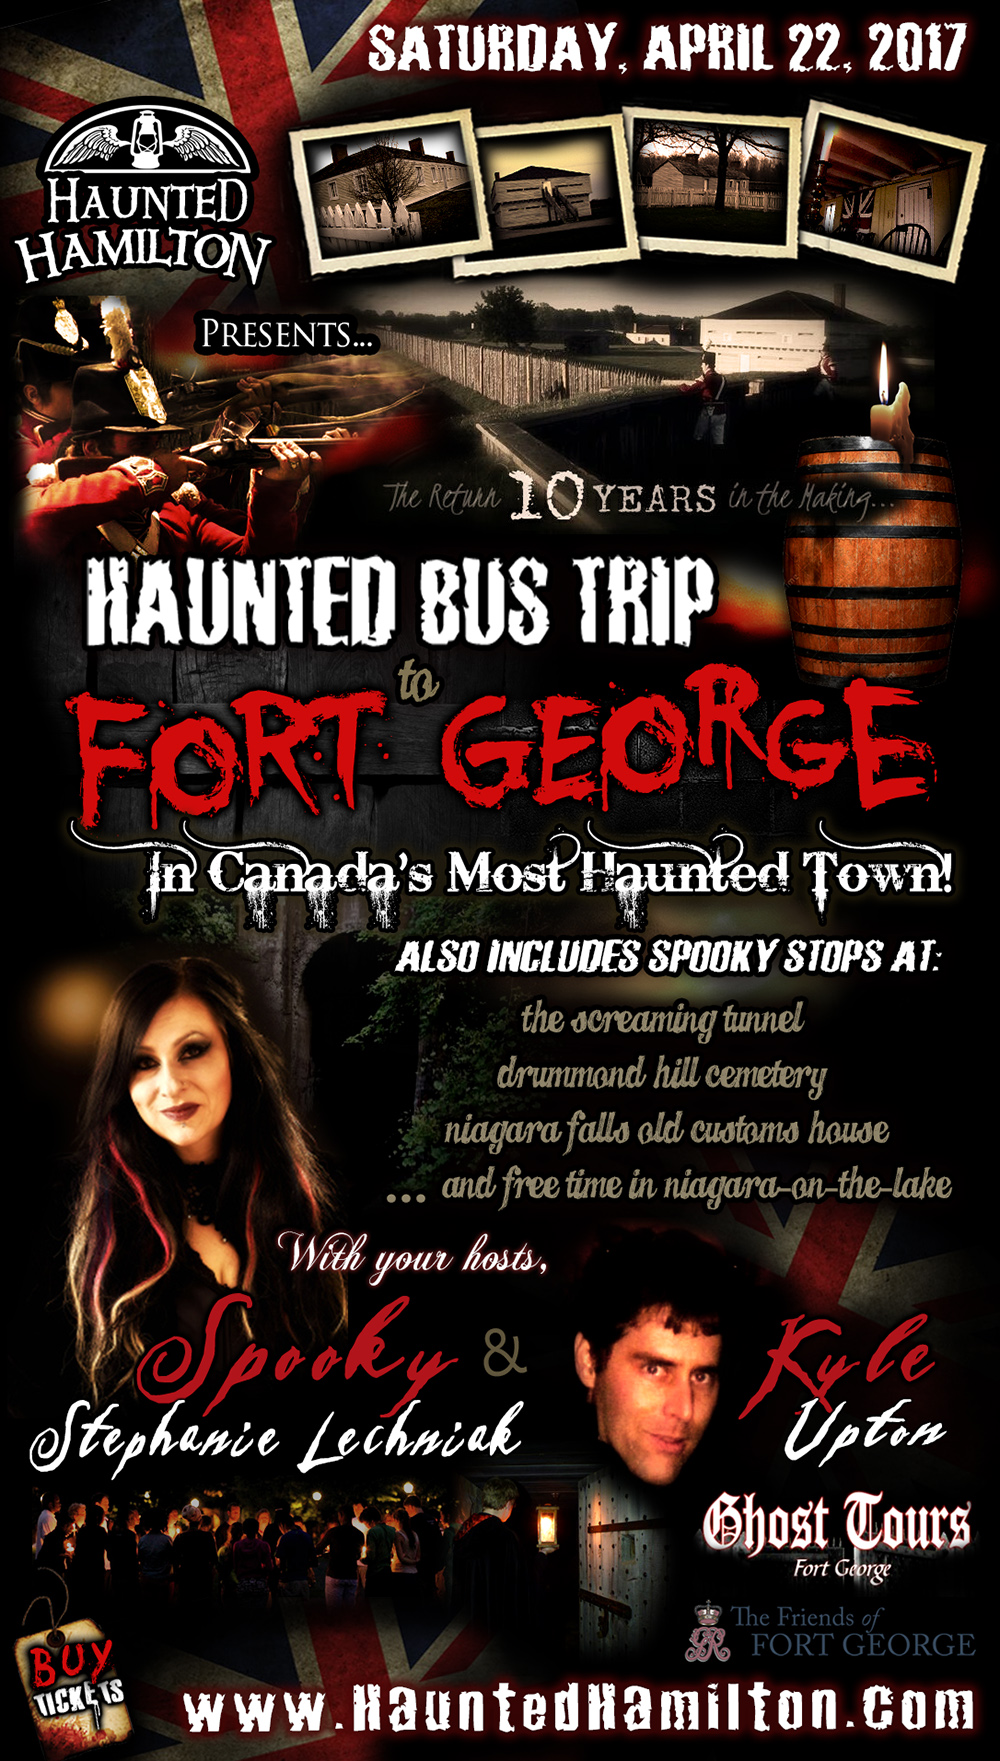 Haunted Hamilton presents a Haunted Bus Trip to FORT GEORGE in Canada's MOST HAUNTED Town, Niagara-on-the-Lake, Ontario, Canada